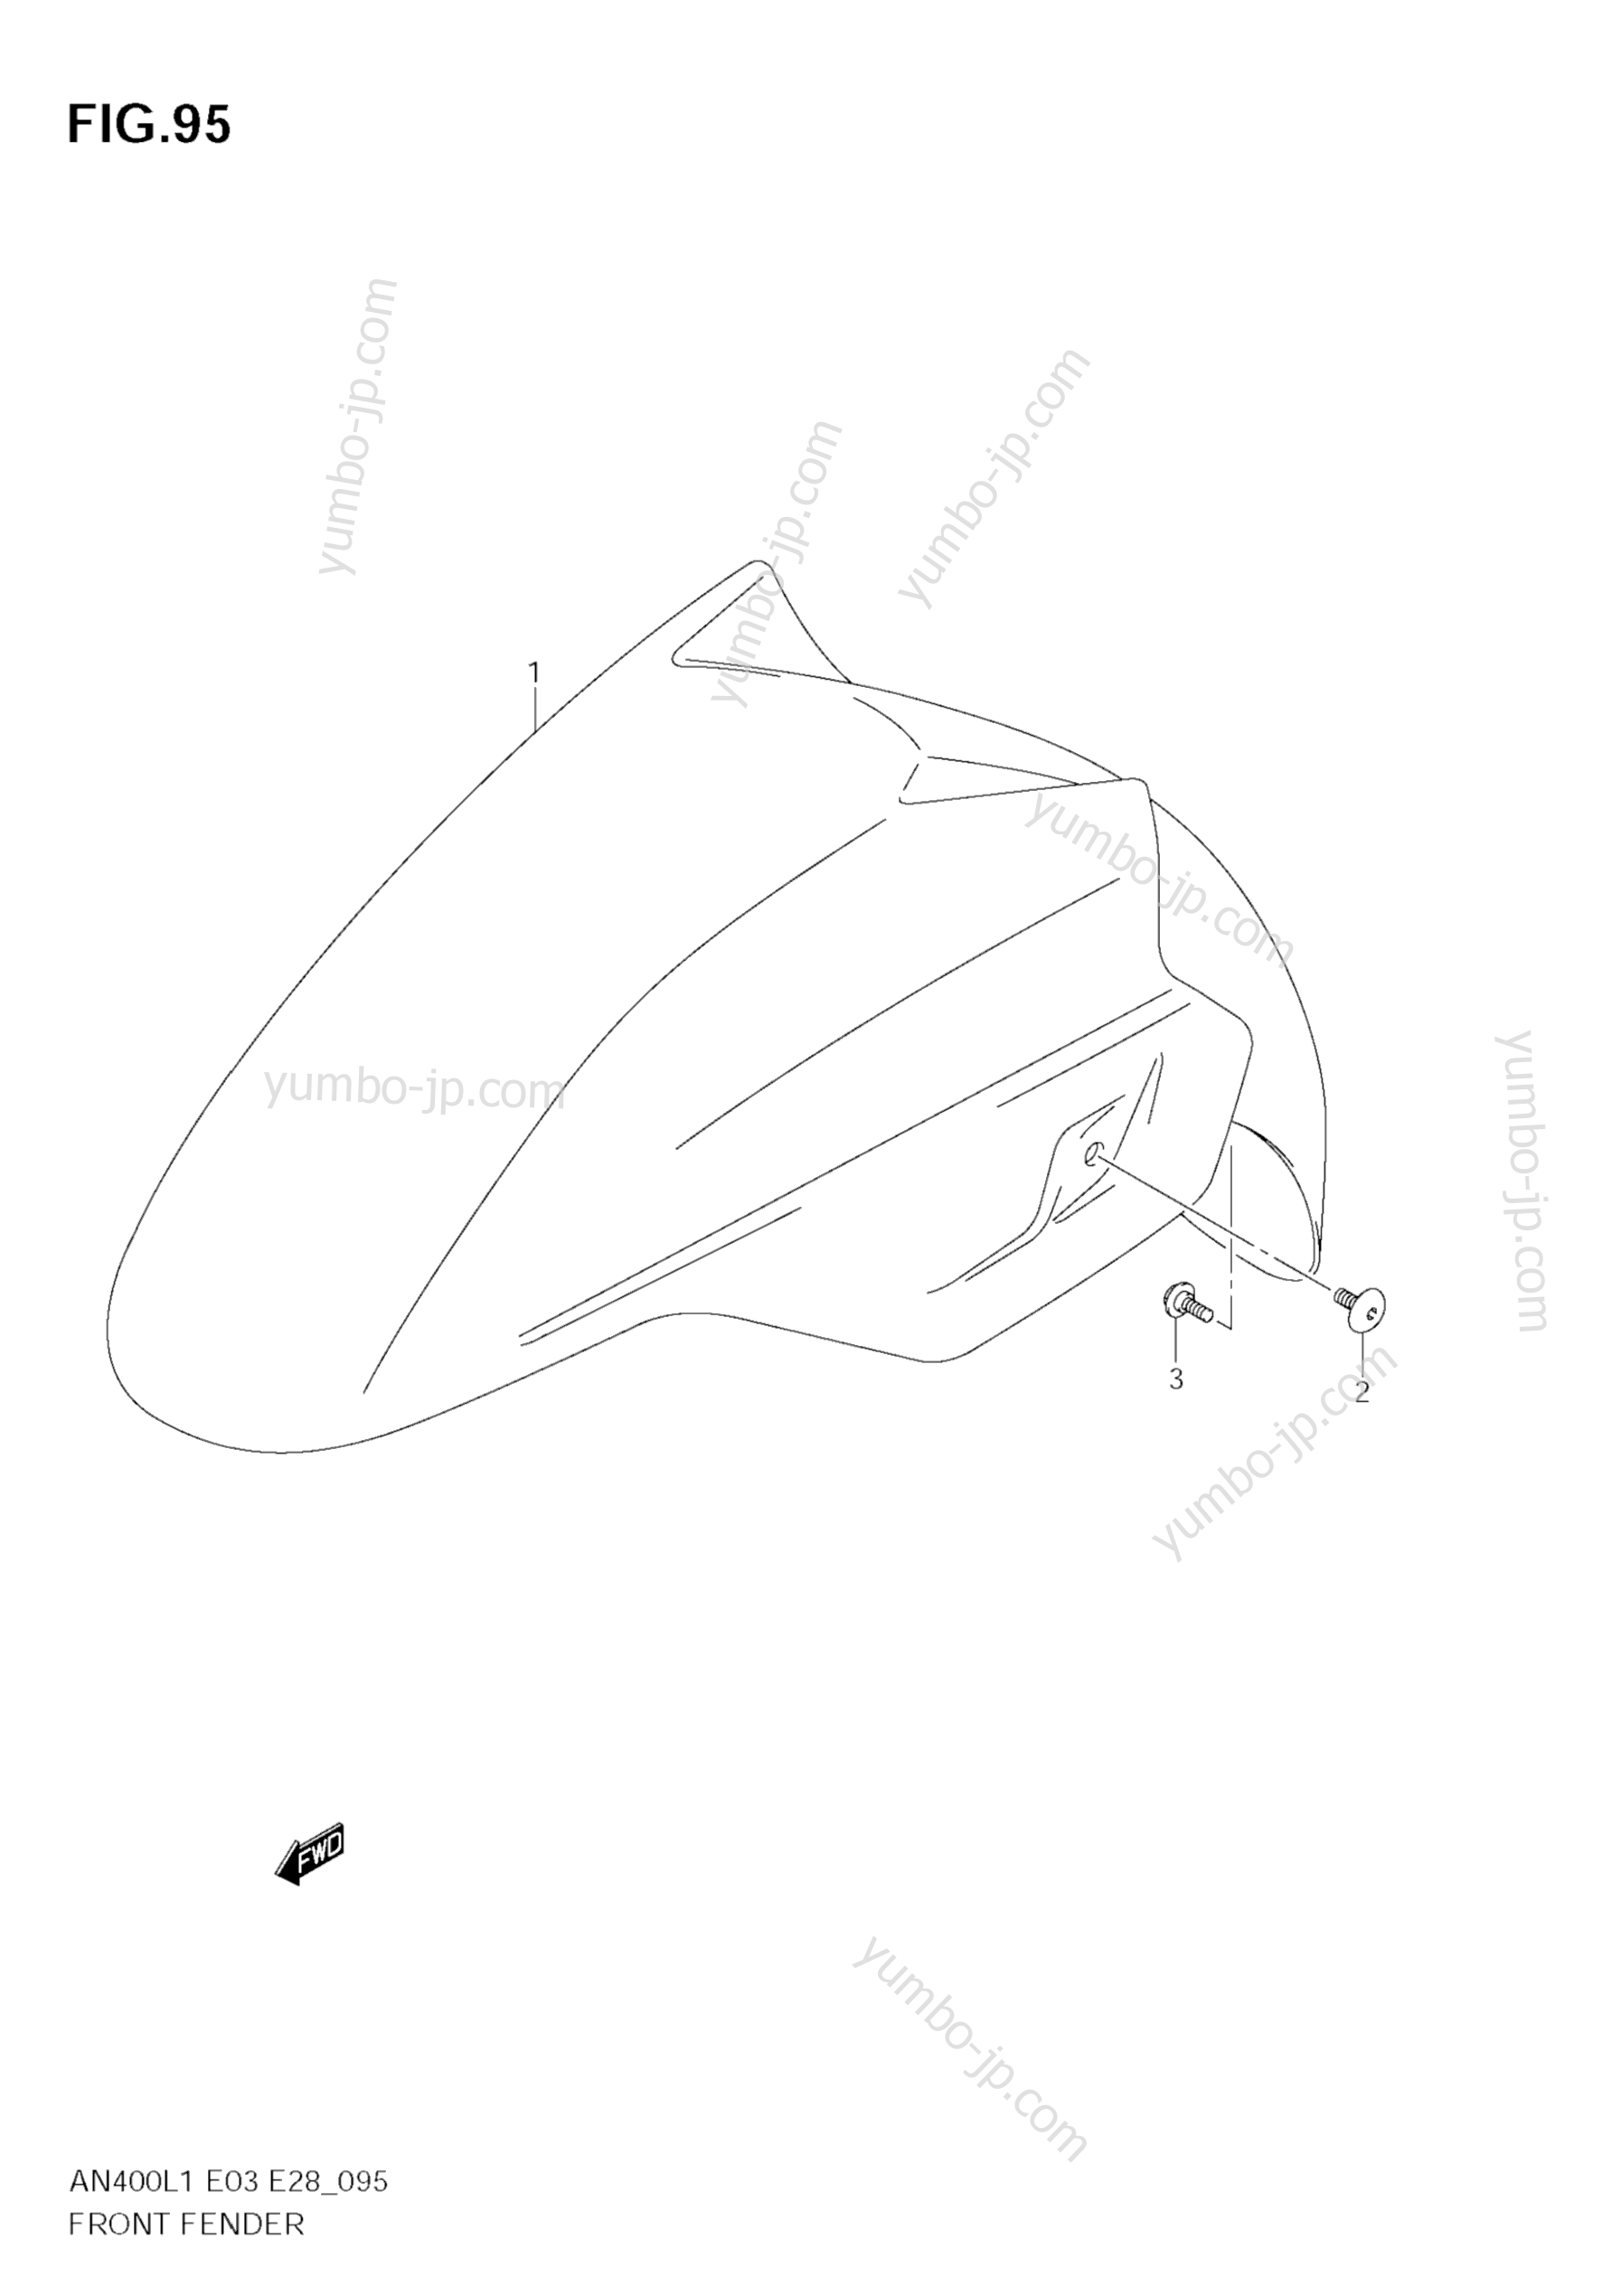 FRONT FENDER (AN400 L1 E3) for scooters SUZUKI Burgman (AN400A) 2011 year